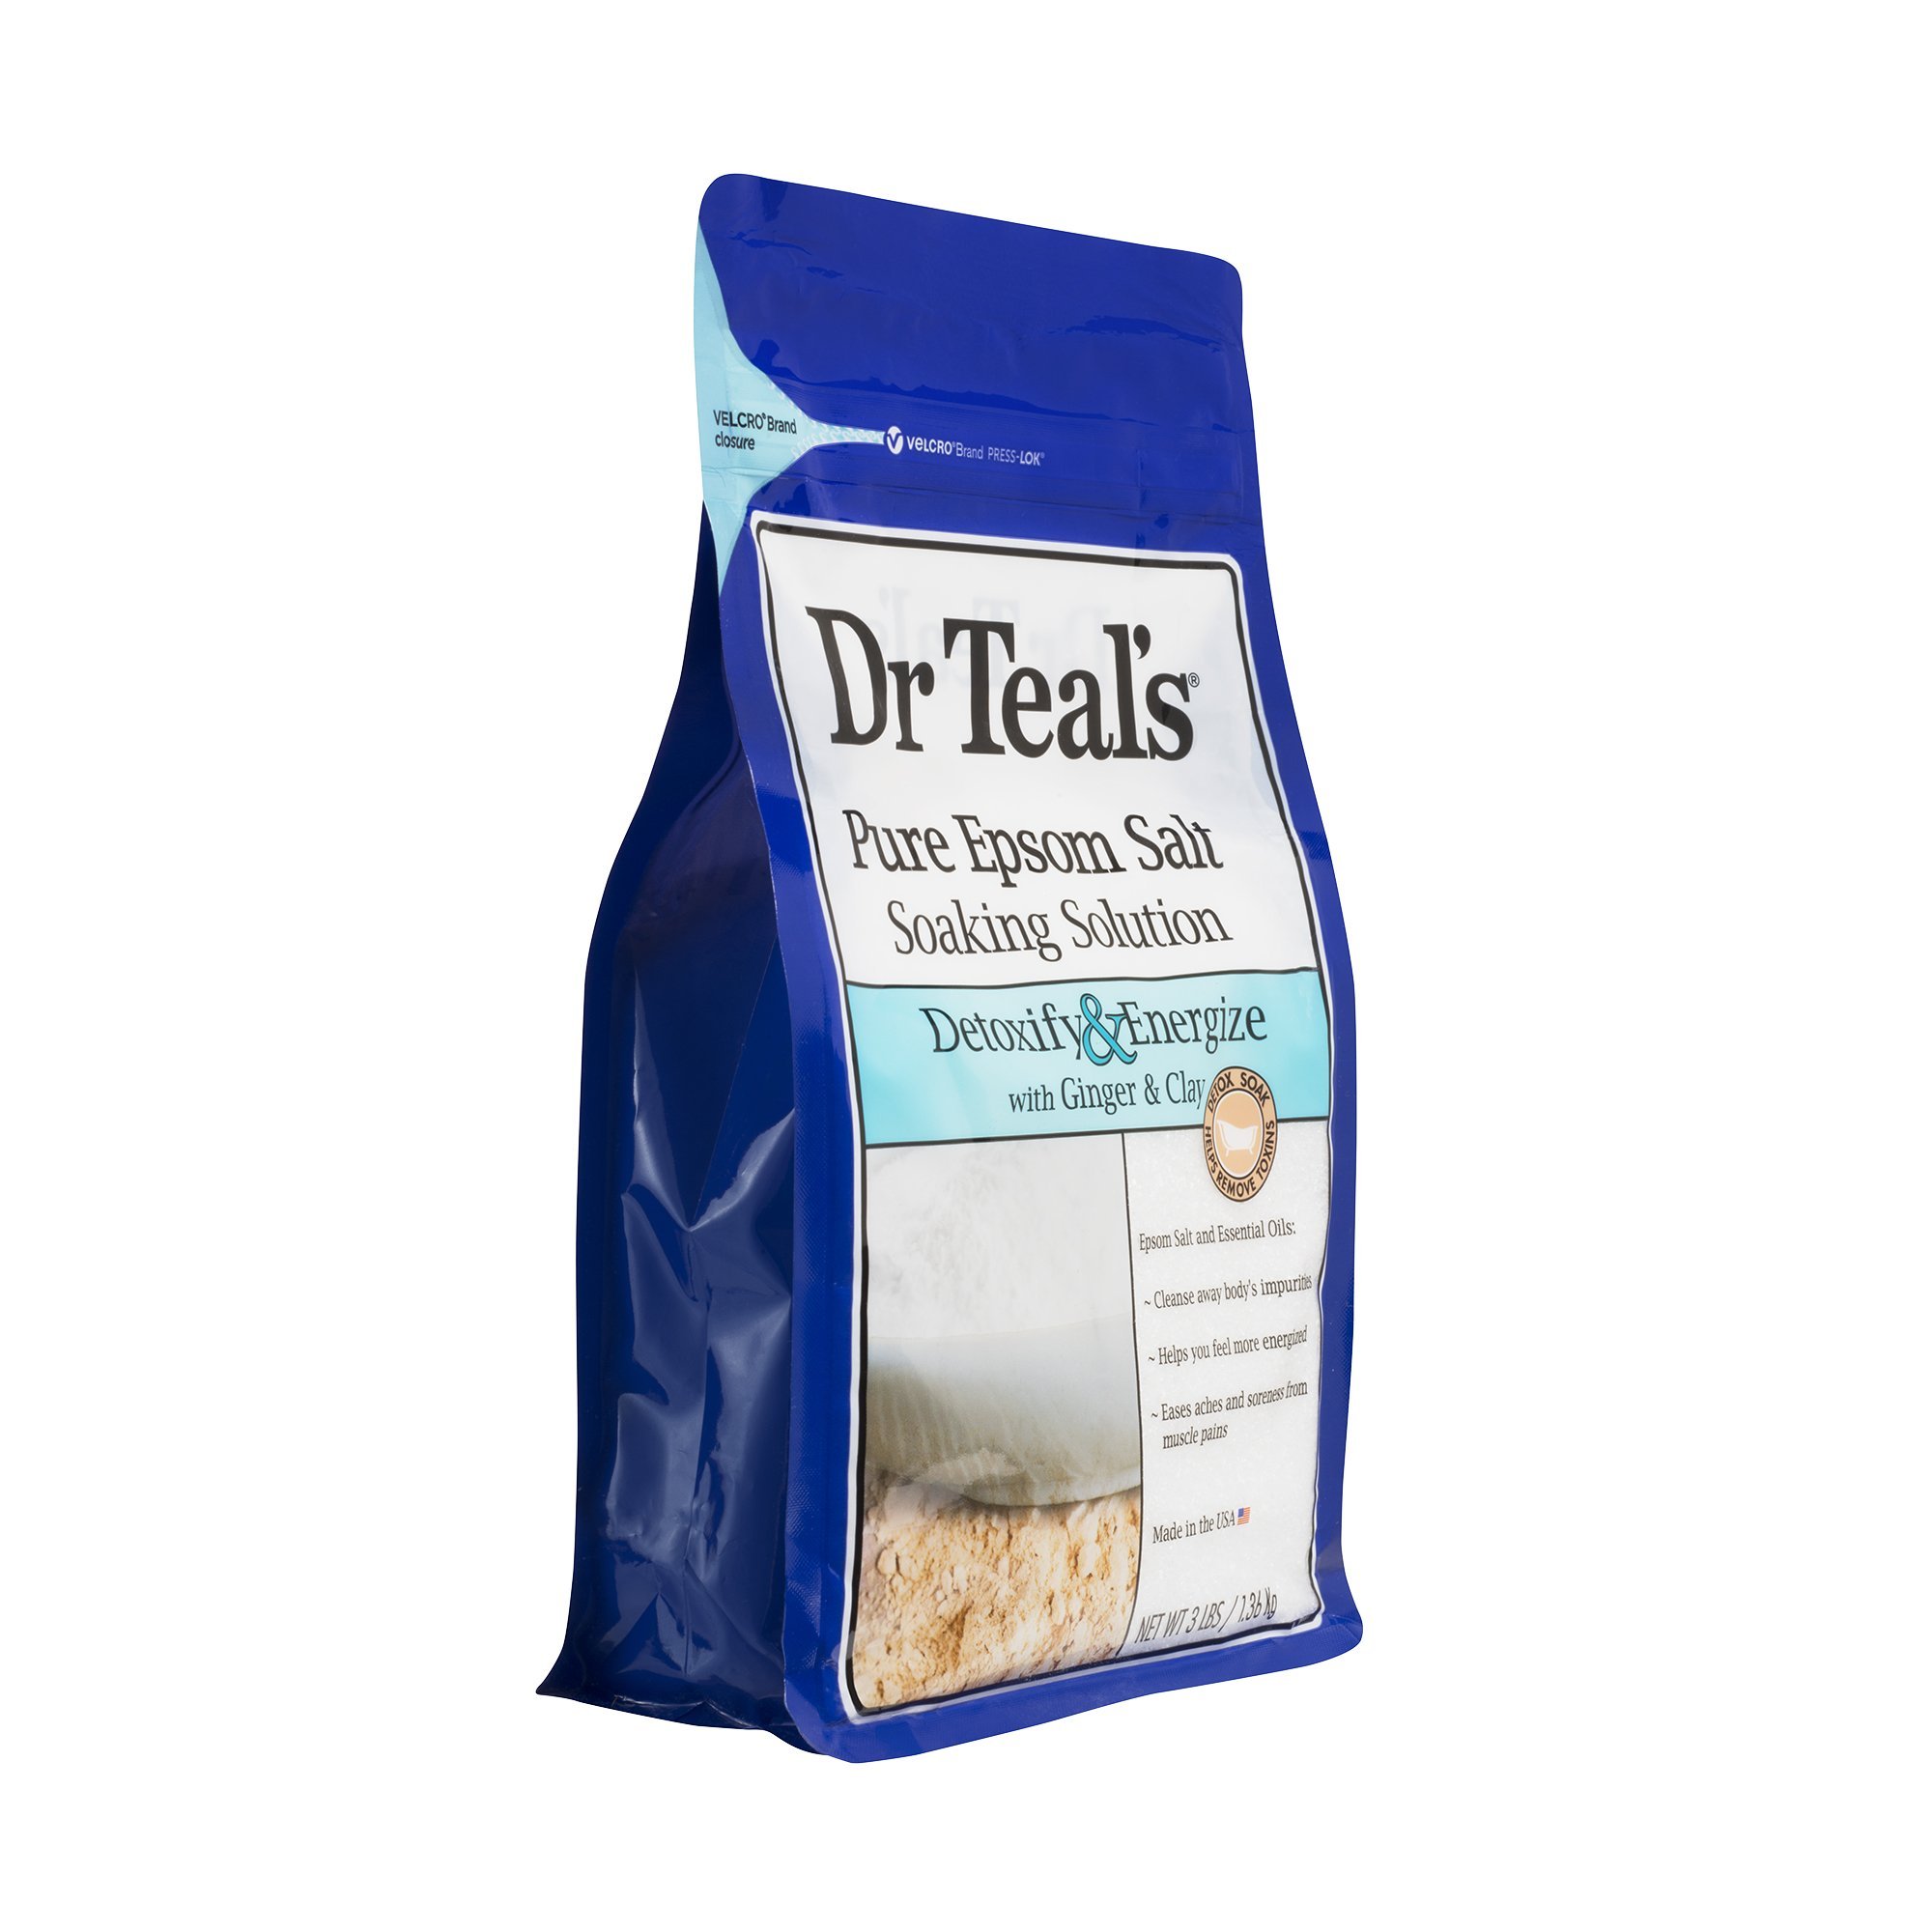 Dr Teal's Pure Epsom Salt Soaking Solution, Energize with Ginger & Clay, 3 Pound Bag (Packaging May Vary)